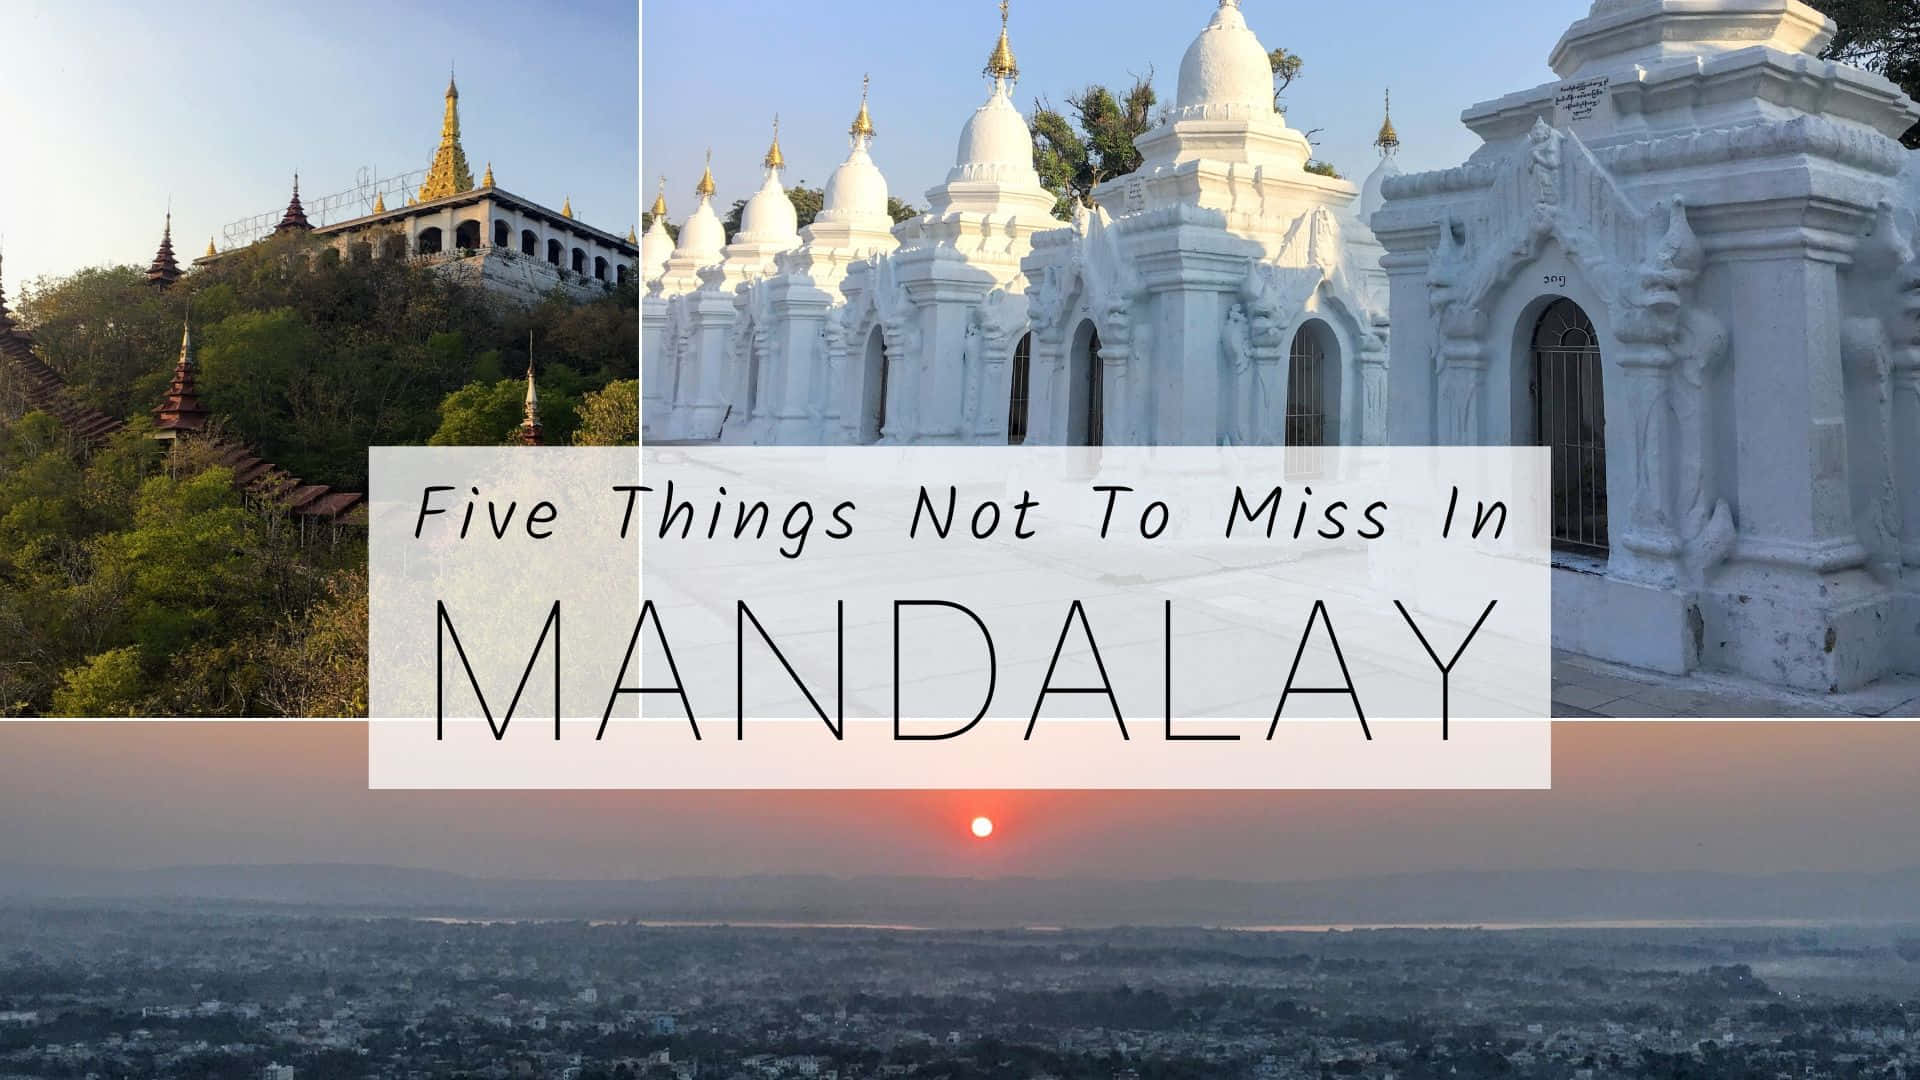 Attractions In Mandalay Featured Image Wallpaper